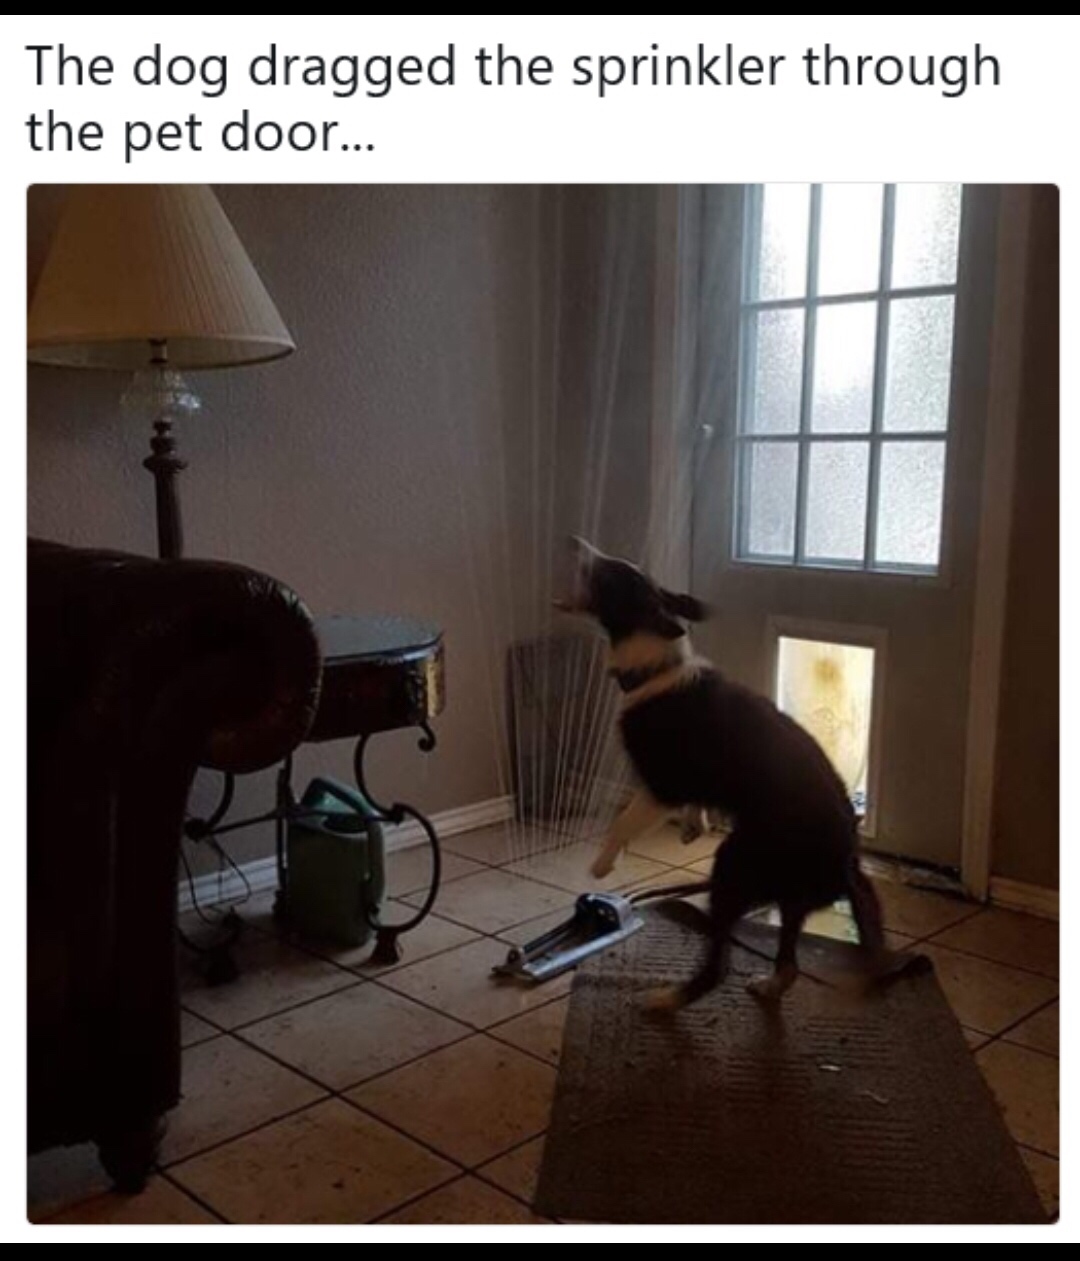 he dragged the sprinkler through the doggy door - The dog dragged the sprinkler through the pet door...